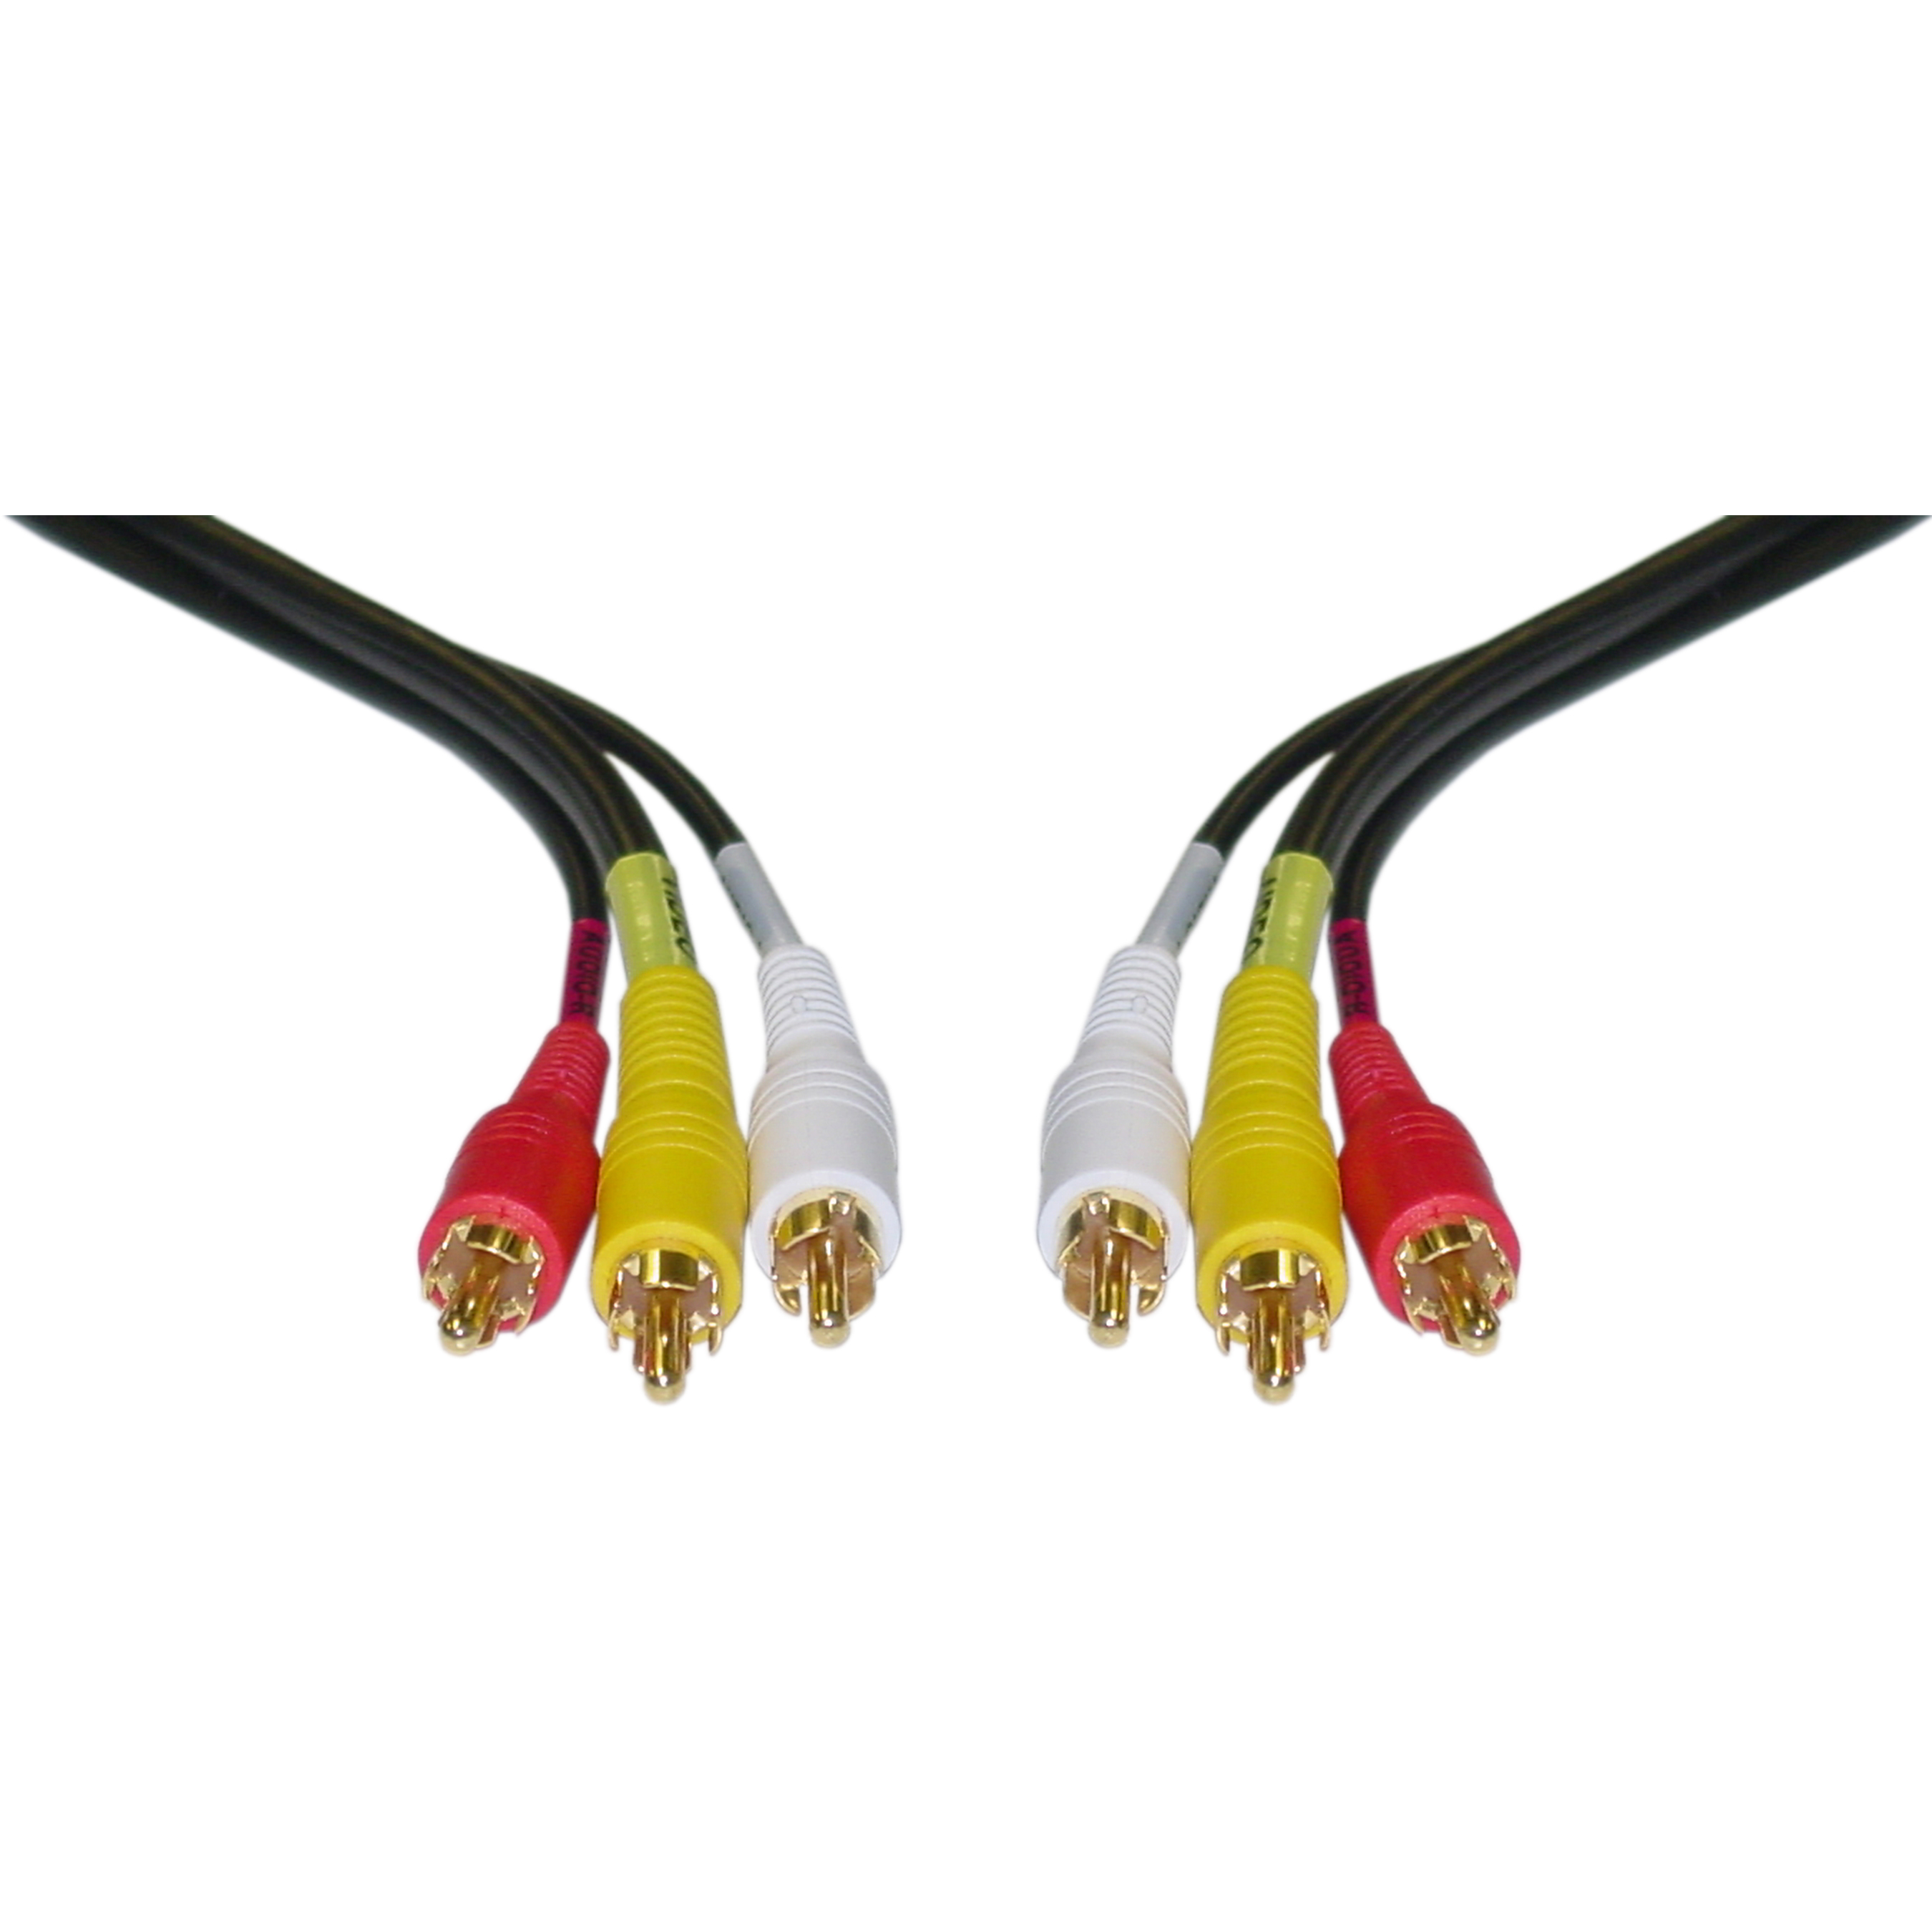 Gold plated rca cable